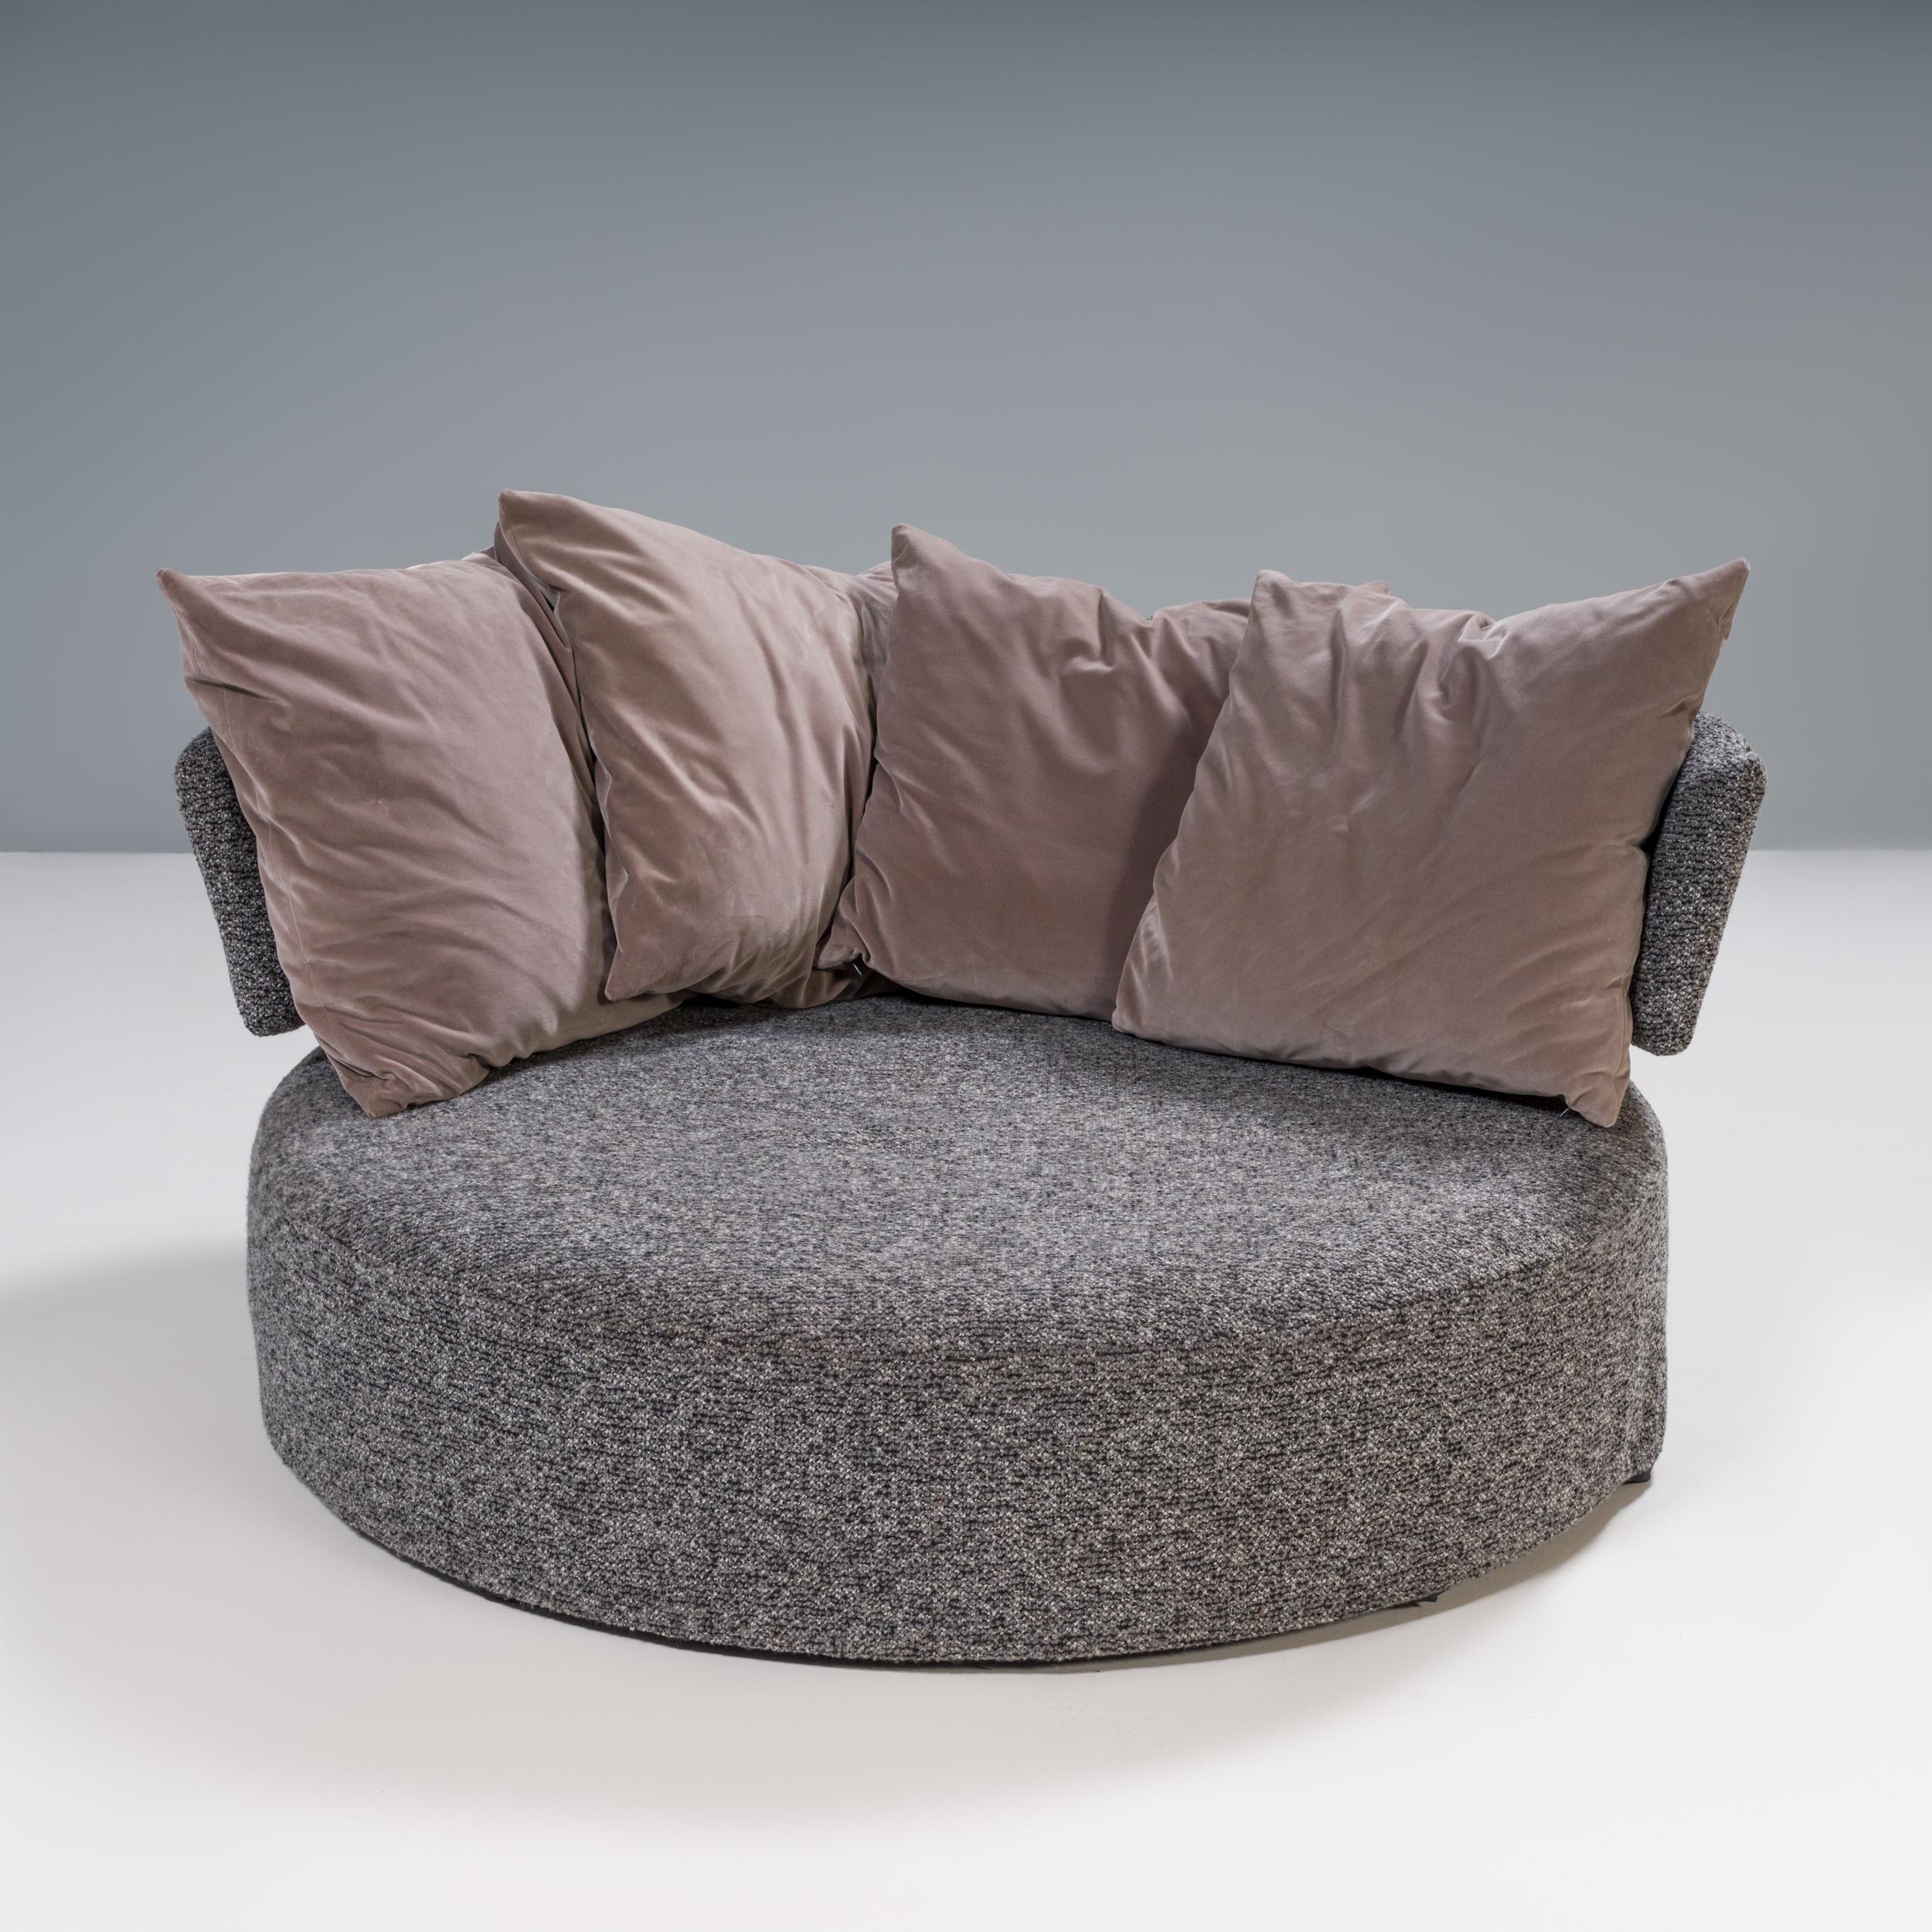 Designed by Antonio Citterio for B&B Italia, the Amoenus collection is a fantastic example of modern design.

The round loveseat is the ideal shape for lounging, with the deep seat offering the ultimate comfort.

Fully upholstered in grey fabric,